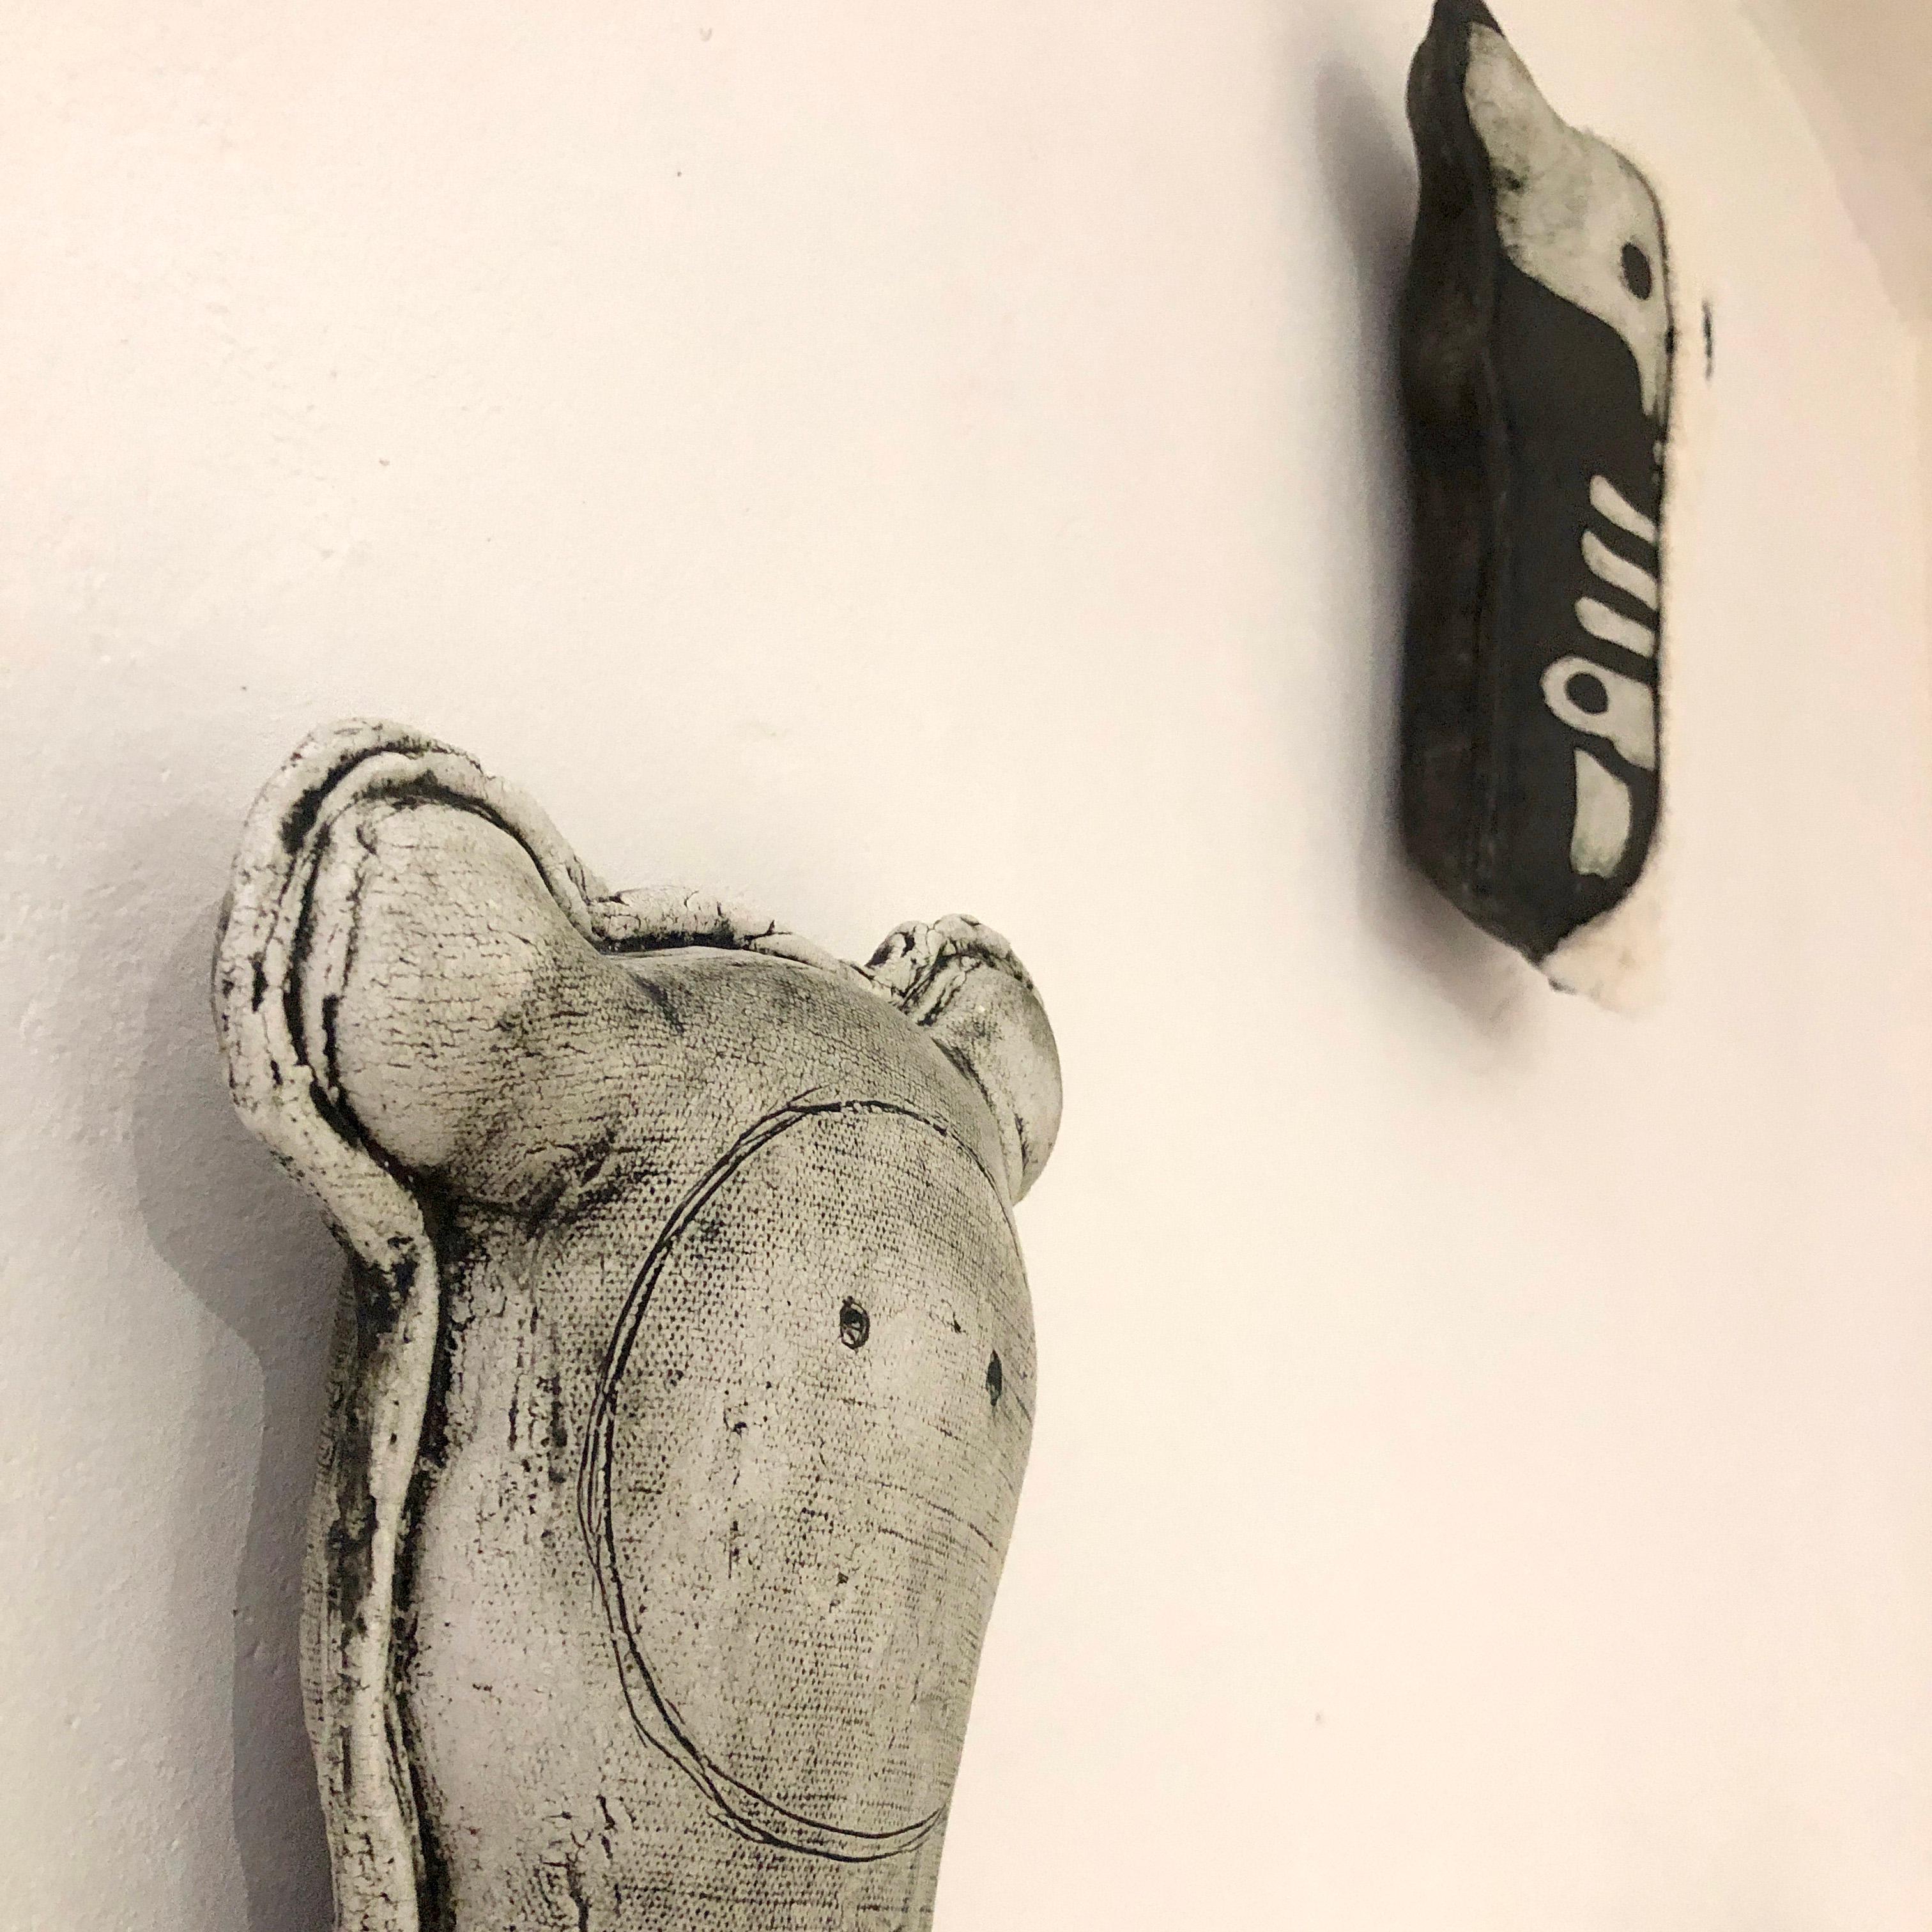 Introducing Théodora Catharina the first or simply Teddy C, a cuddly ceramic teddy bear half Teddy half fluff to hang on your wall. 

Combining contemporary aesthetics with a touch of rebellion and  urban charm. Crafted by the skilled hands of